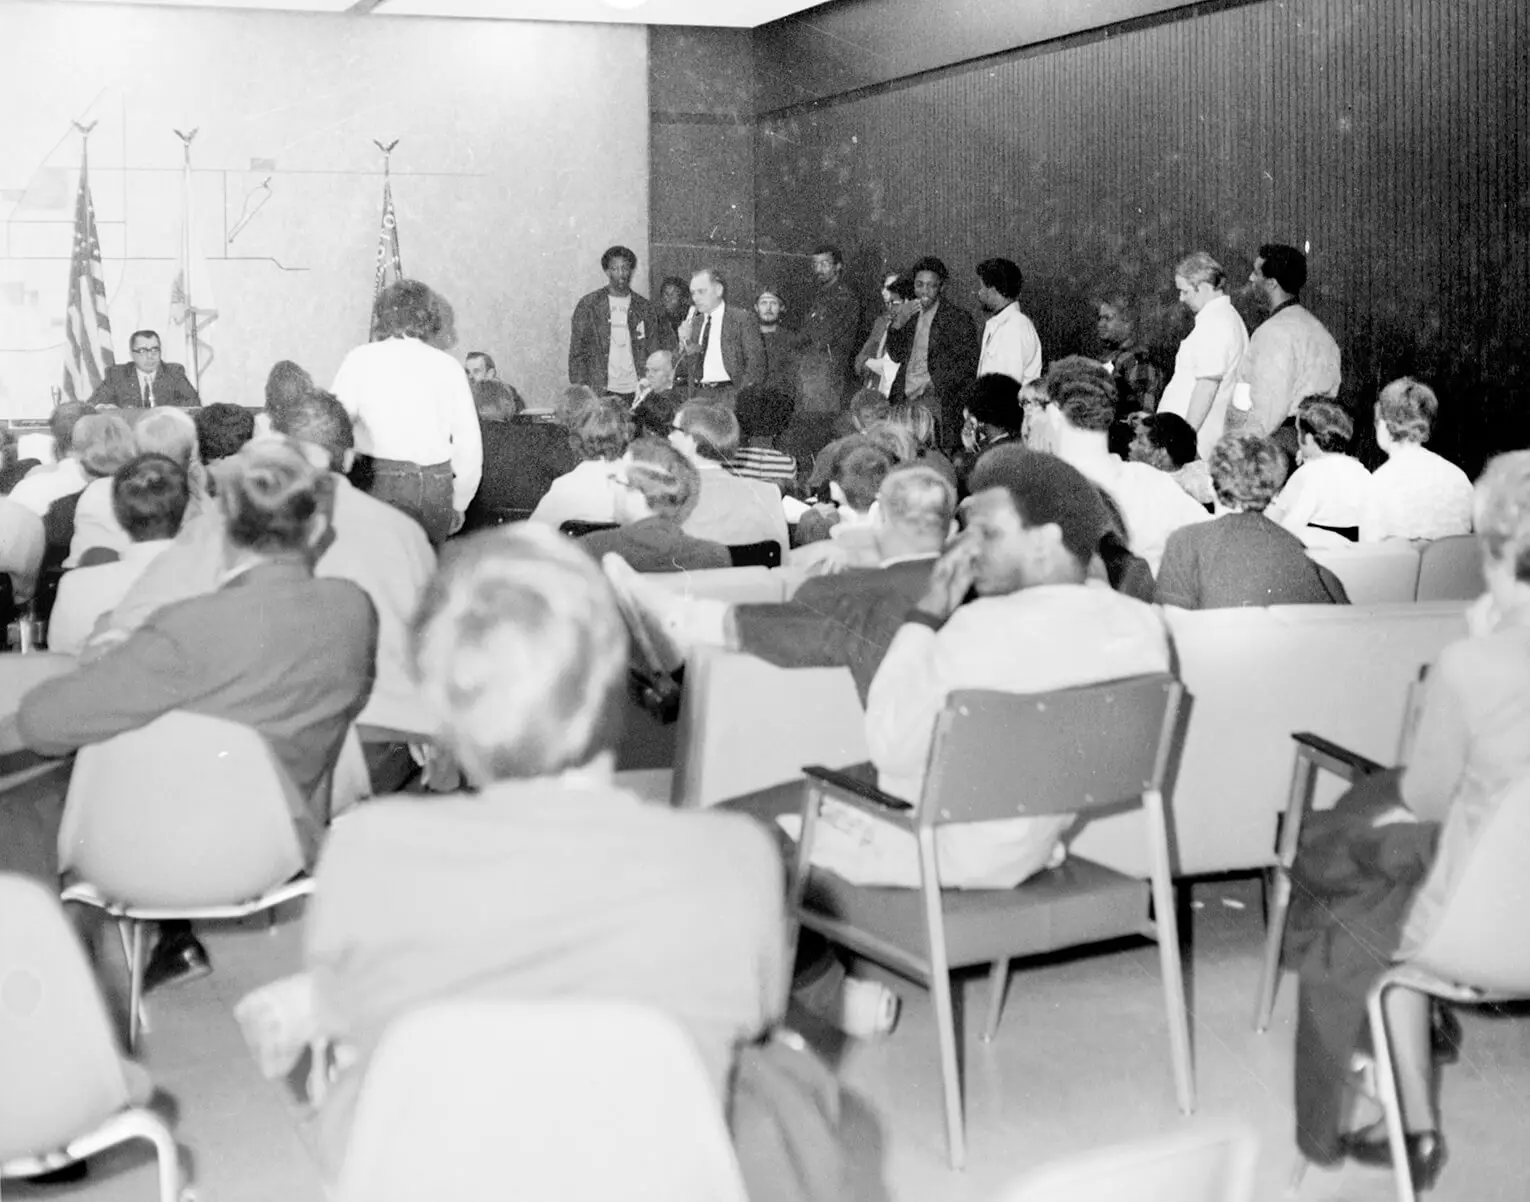 People are seen sitting and standing listening to a speaker at a city meeting.